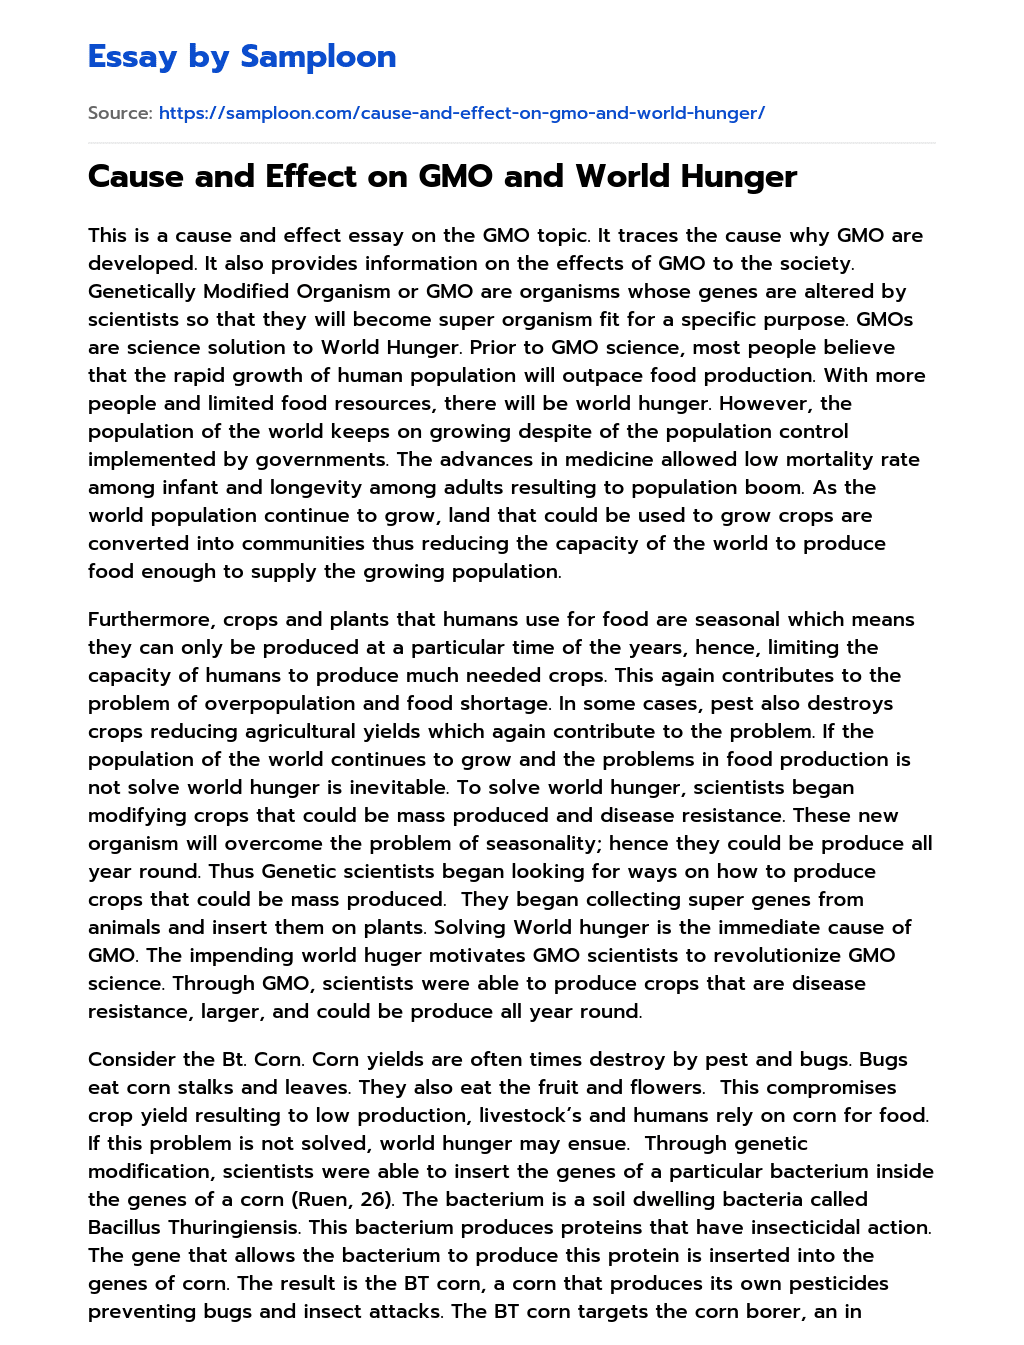 Cause and Effect on GMO and World Hunger essay